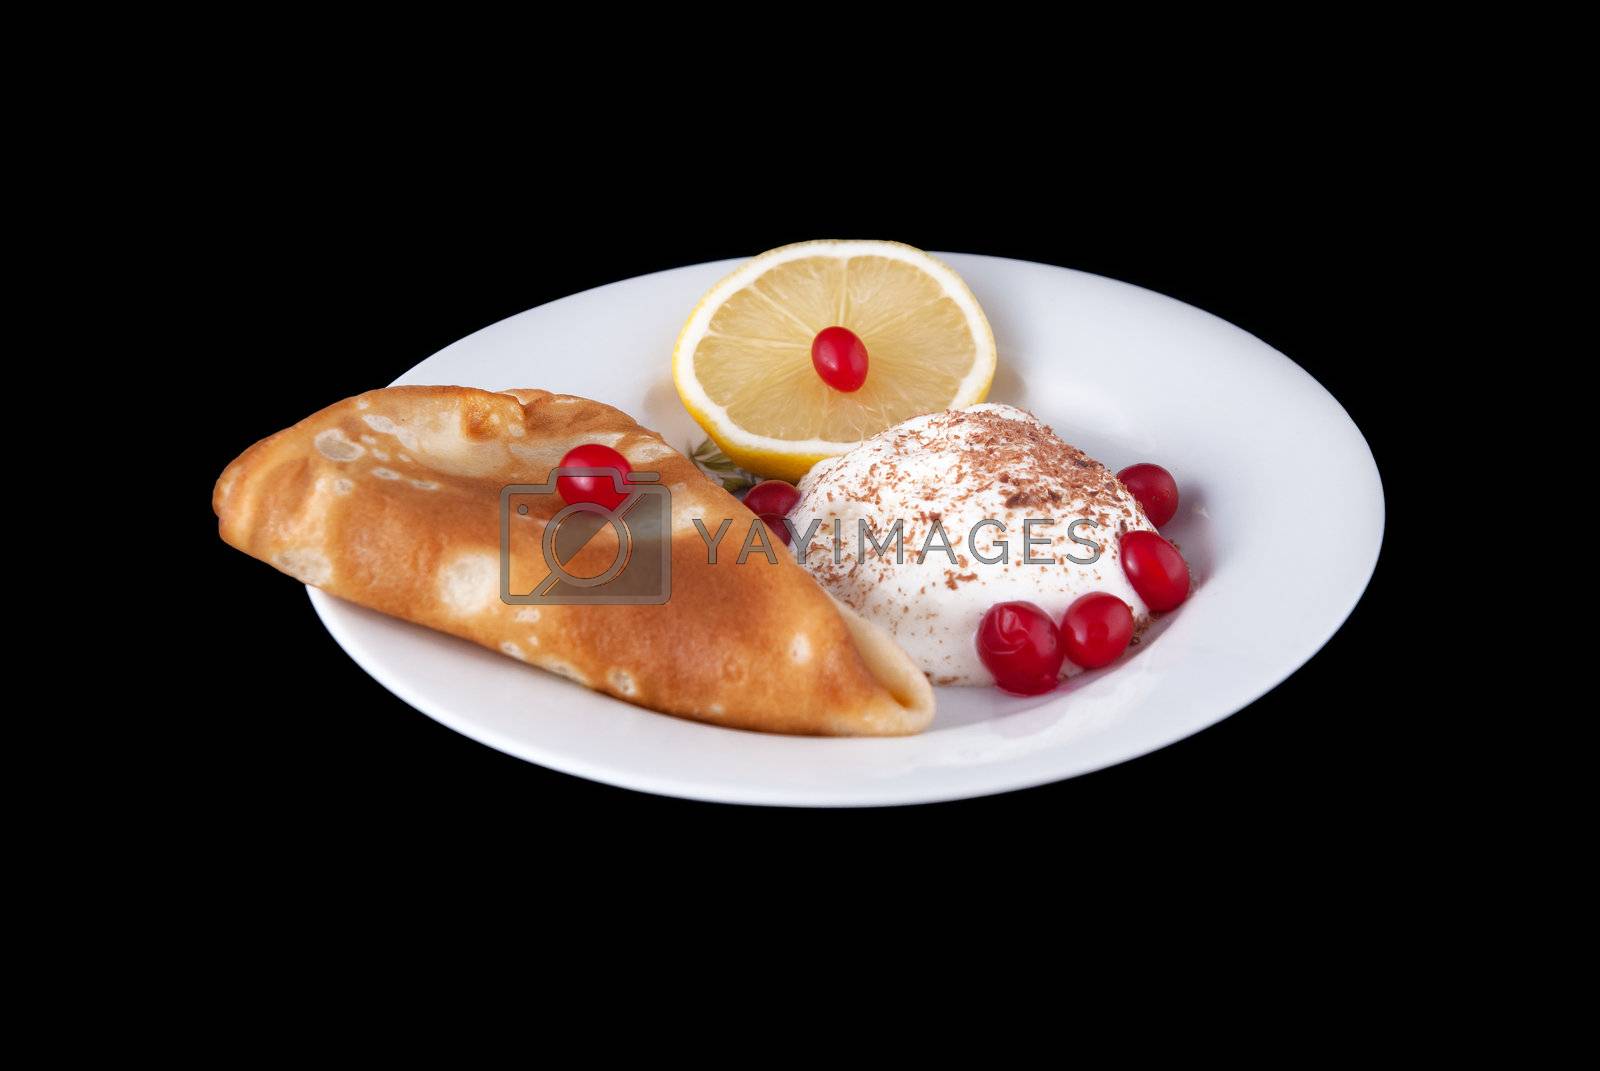 Royalty free image of Pancake with ice cream by firewings